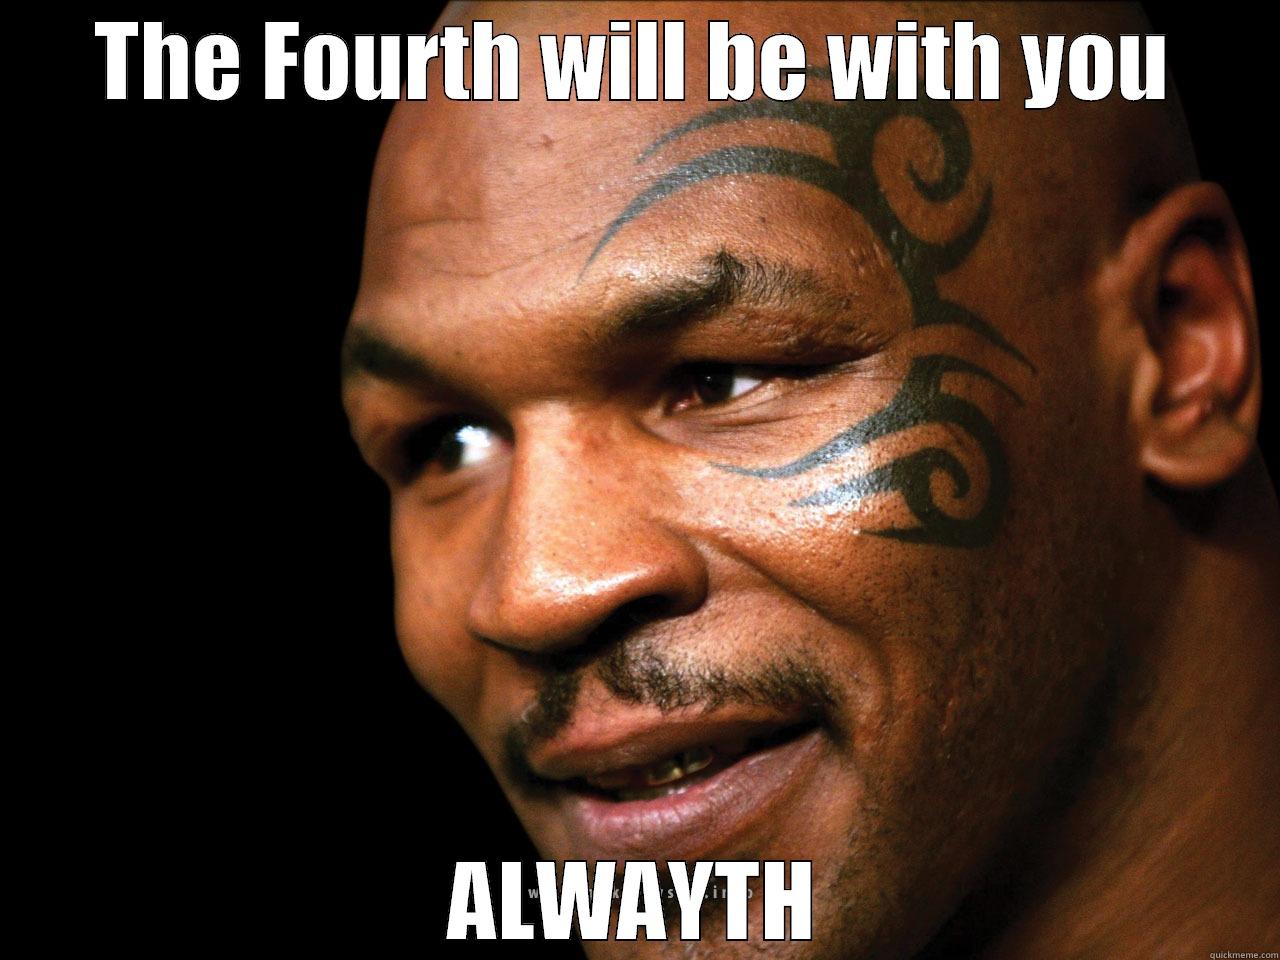 MIKE TYSON THE 4TH - THE FOURTH WILL BE WITH YOU ALWAYTH Misc